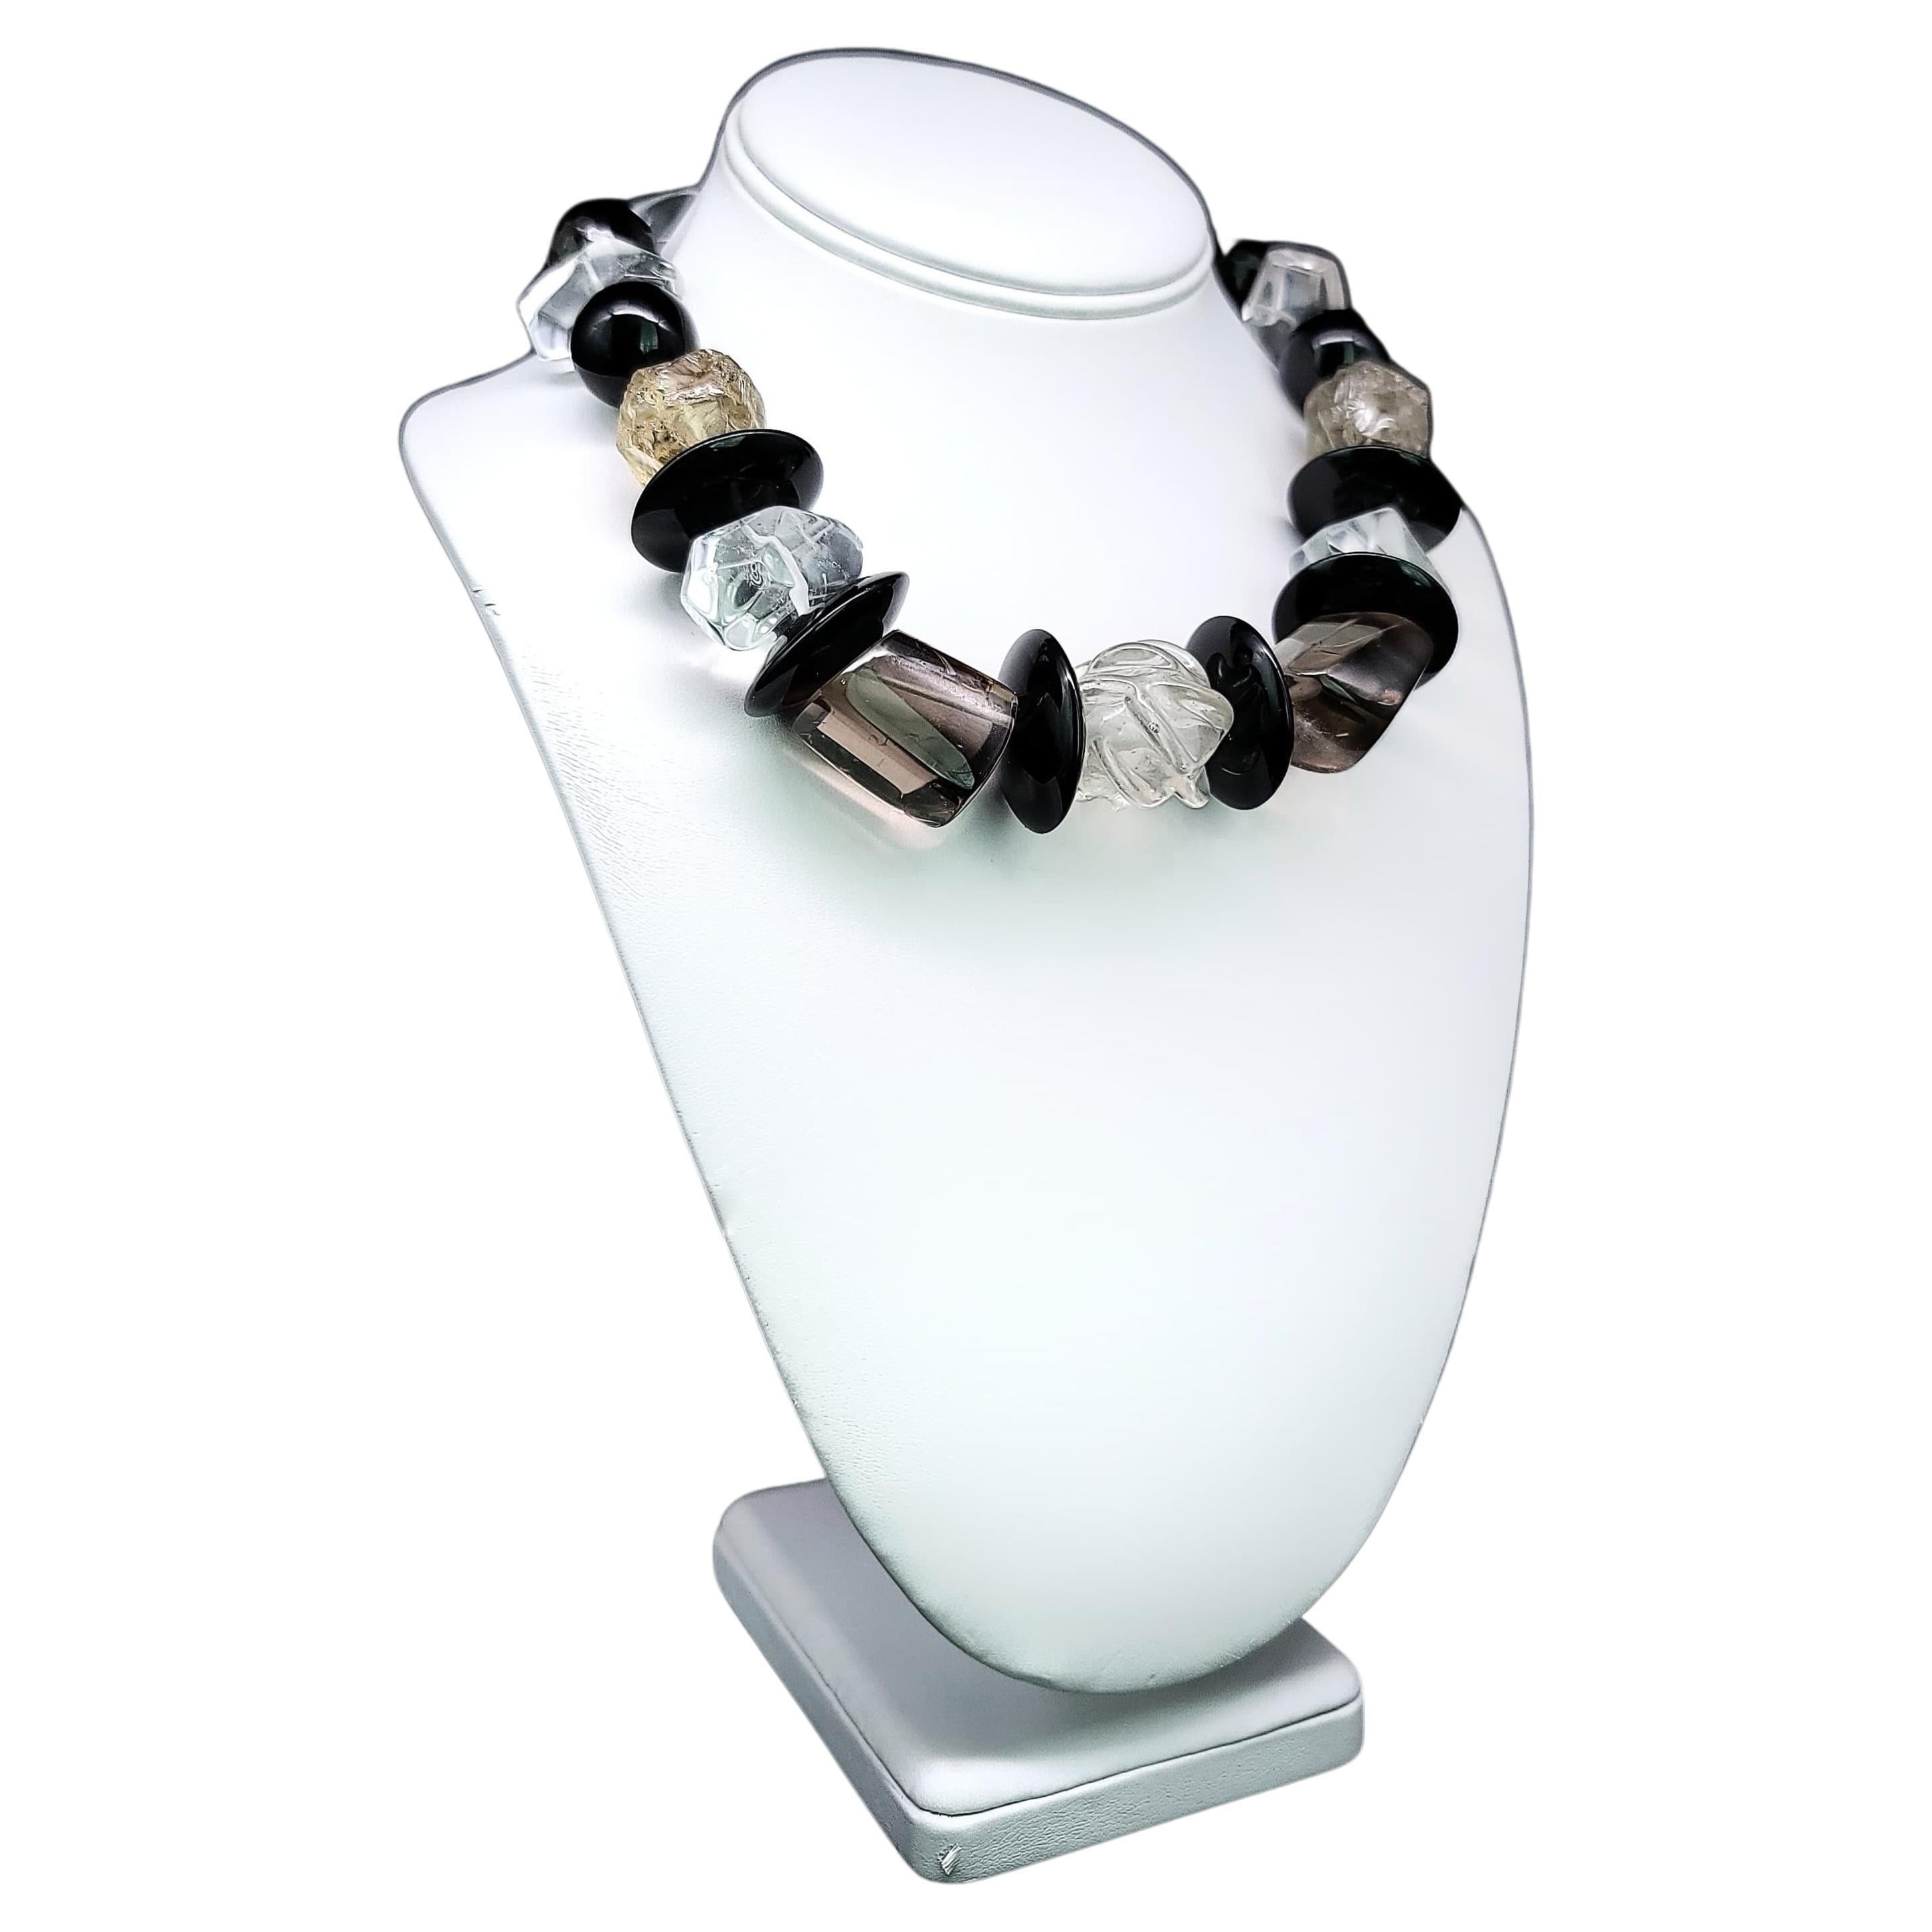 Exclusively Unique and Captivating Necklace:

This remarkable necklace is a one-of-a-kind creation that exudes both boldness and beauty in every facet. It showcases a striking combination of meticulously selected Crystal, Smoky Quartz, and Onyx